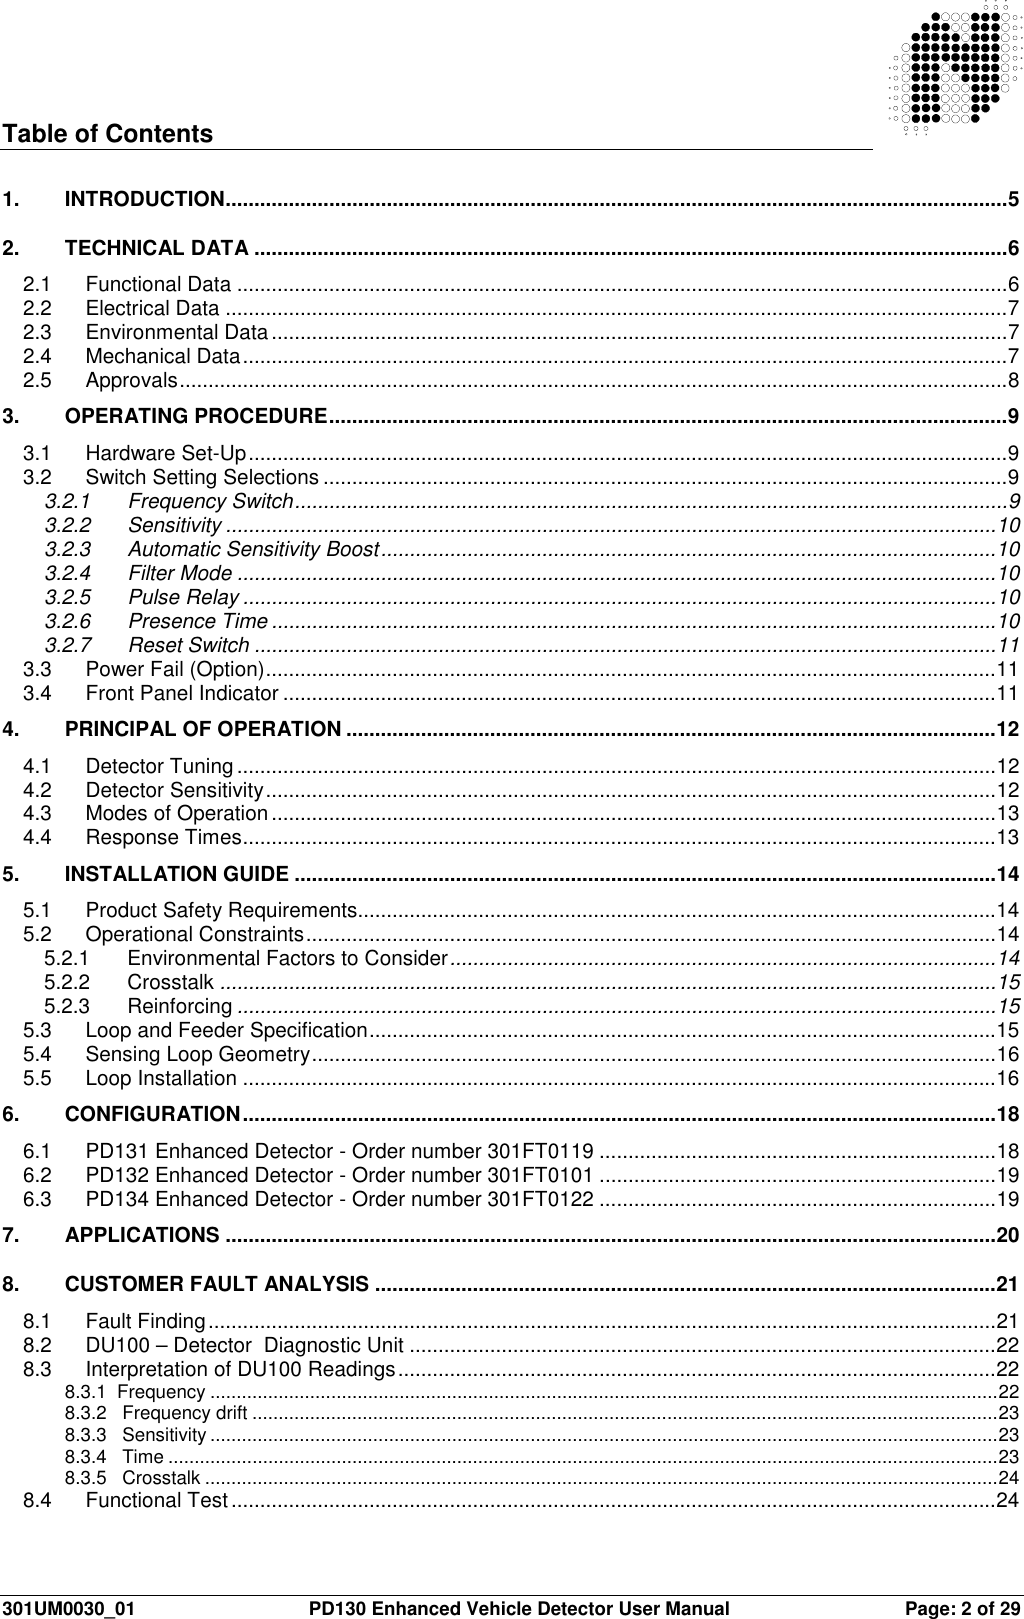  301UM0030_01  PD130 Enhanced Vehicle Detector User Manual  Page: 2 of 29   Table of Contents  1. INTRODUCTION........................................................................................................................................5 2. TECHNICAL DATA ...................................................................................................................................6 2.1 Functional Data ......................................................................................................................................6 2.2 Electrical Data ........................................................................................................................................7 2.3 Environmental Data................................................................................................................................7 2.4 Mechanical Data.....................................................................................................................................7 2.5 Approvals................................................................................................................................................8 3. OPERATING PROCEDURE......................................................................................................................9 3.1 Hardware Set-Up....................................................................................................................................9 3.2 Switch Setting Selections .......................................................................................................................9 3.2.1 Frequency Switch............................................................................................................................9 3.2.2 Sensitivity ......................................................................................................................................10 3.2.3 Automatic Sensitivity Boost...........................................................................................................10 3.2.4 Filter Mode ....................................................................................................................................10 3.2.5 Pulse Relay ...................................................................................................................................10 3.2.6 Presence Time ..............................................................................................................................10 3.2.7 Reset Switch .................................................................................................................................11 3.3 Power Fail (Option)...............................................................................................................................11 3.4 Front Panel Indicator ............................................................................................................................11 4.  PRINCIPAL OF OPERATION .................................................................................................................12 4.1 Detector Tuning....................................................................................................................................12 4.2 Detector Sensitivity...............................................................................................................................12 4.3 Modes of Operation..............................................................................................................................13 4.4 Response Times...................................................................................................................................13 5. INSTALLATION GUIDE ..........................................................................................................................14 5.1 Product Safety Requirements...............................................................................................................14 5.2 Operational Constraints........................................................................................................................14 5.2.1 Environmental Factors to Consider...............................................................................................14 5.2.2 Crosstalk .......................................................................................................................................15 5.2.3 Reinforcing ....................................................................................................................................15 5.3 Loop and Feeder Specification.............................................................................................................15 5.4 Sensing Loop Geometry.......................................................................................................................16 5.5 Loop Installation ...................................................................................................................................16 6. CONFIGURATION...................................................................................................................................18 6.1 PD131 Enhanced Detector - Order number 301FT0119 .....................................................................18 6.2 PD132 Enhanced Detector - Order number 301FT0101 .....................................................................19 6.3 PD134 Enhanced Detector - Order number 301FT0122 .....................................................................19 7. APPLICATIONS ......................................................................................................................................20 8. CUSTOMER FAULT ANALYSIS ............................................................................................................21 8.1 Fault Finding.........................................................................................................................................21 8.2 DU100 – Detector  Diagnostic Unit ......................................................................................................22 8.3 Interpretation of DU100 Readings........................................................................................................22 8.3.1  Frequency ......................................................................................................................................................22 8.3.2   Frequency drift ..............................................................................................................................................23 8.3.3   Sensitivity ......................................................................................................................................................23 8.3.4   Time ..............................................................................................................................................................23 8.3.5   Crosstalk .......................................................................................................................................................24 8.4 Functional Test.....................................................................................................................................24 